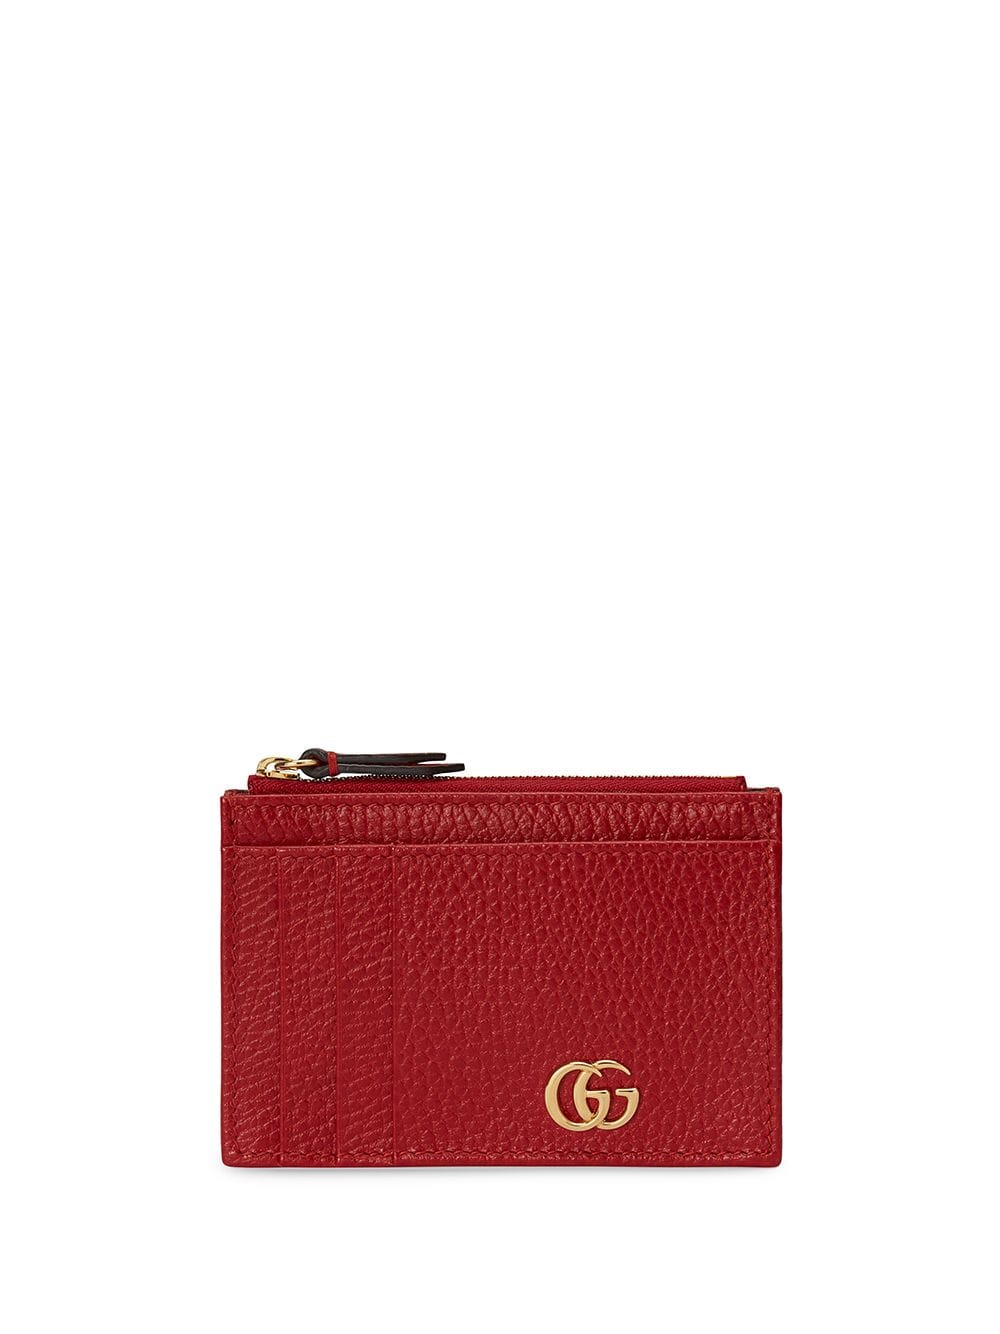 gucci card holder with zipper Off 68% -